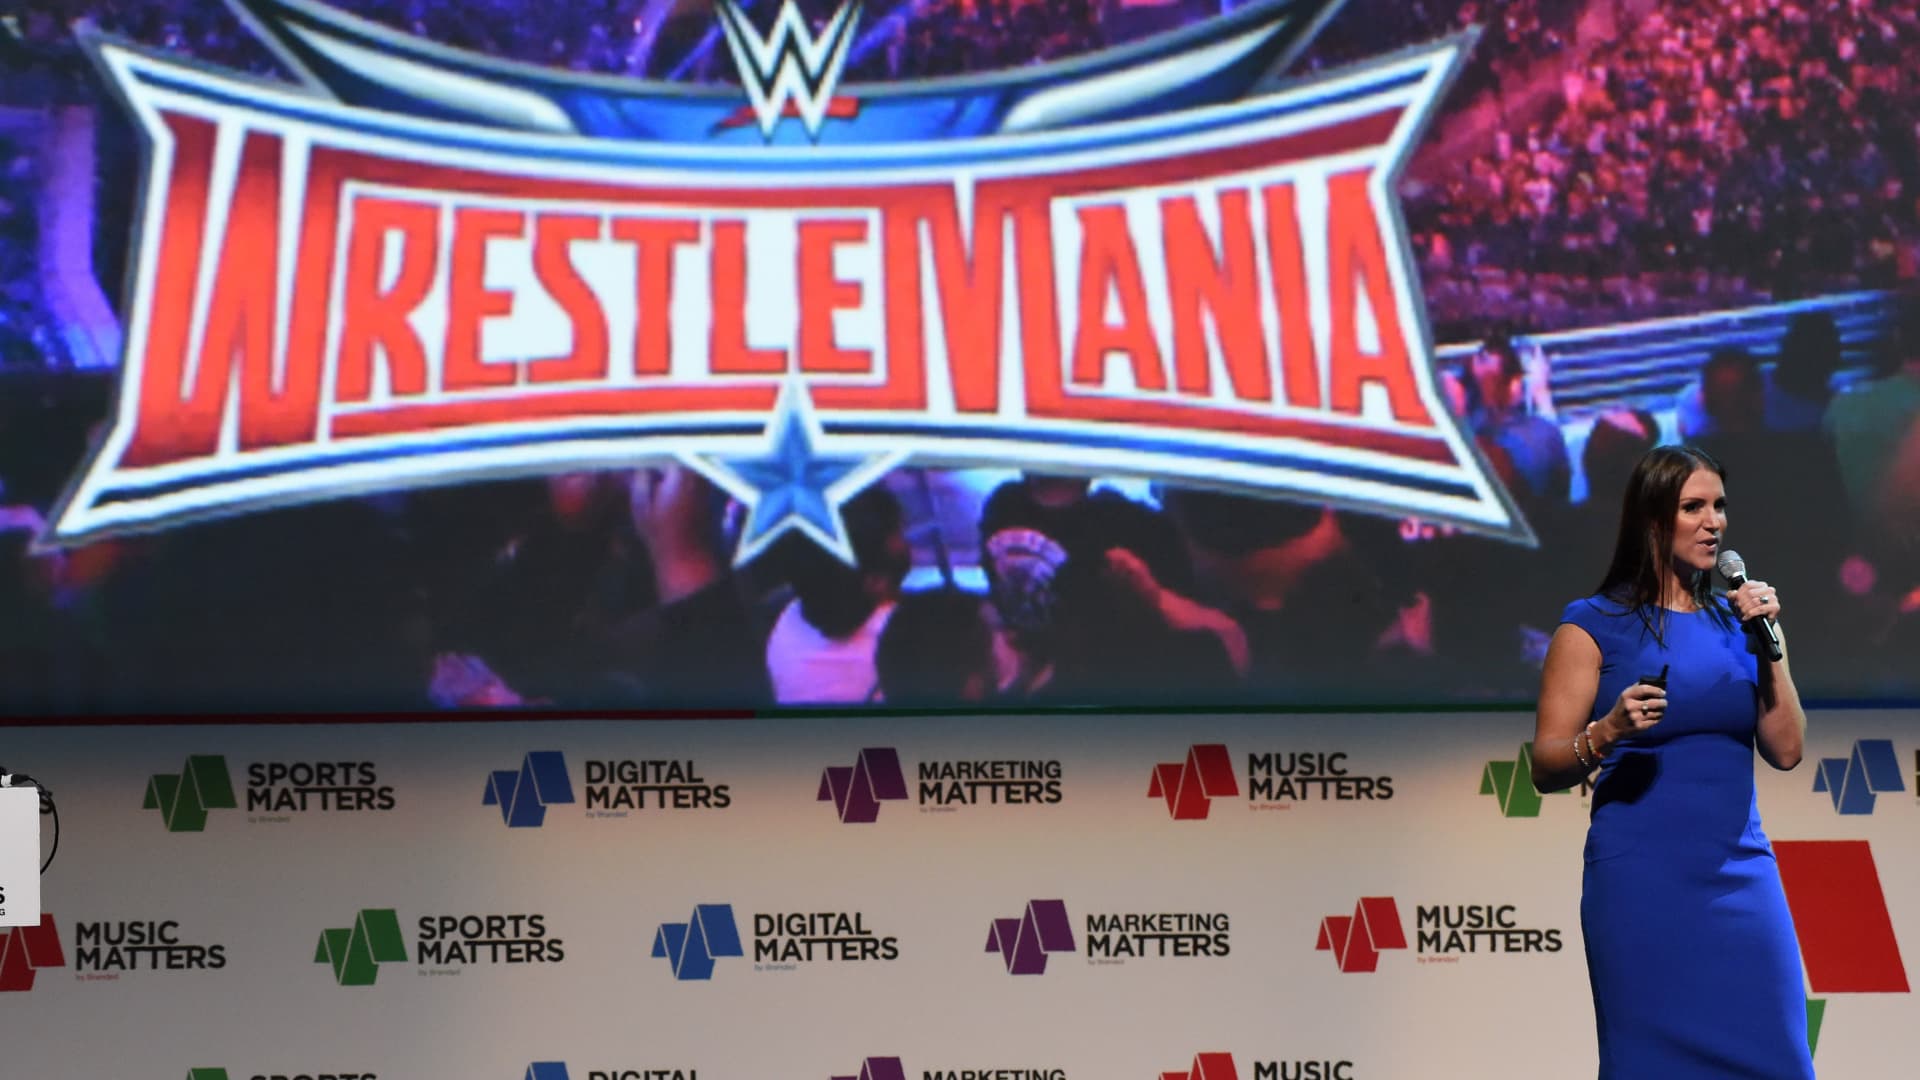 WWE looks to boost sponsorship revenue as live events return, media deal expires